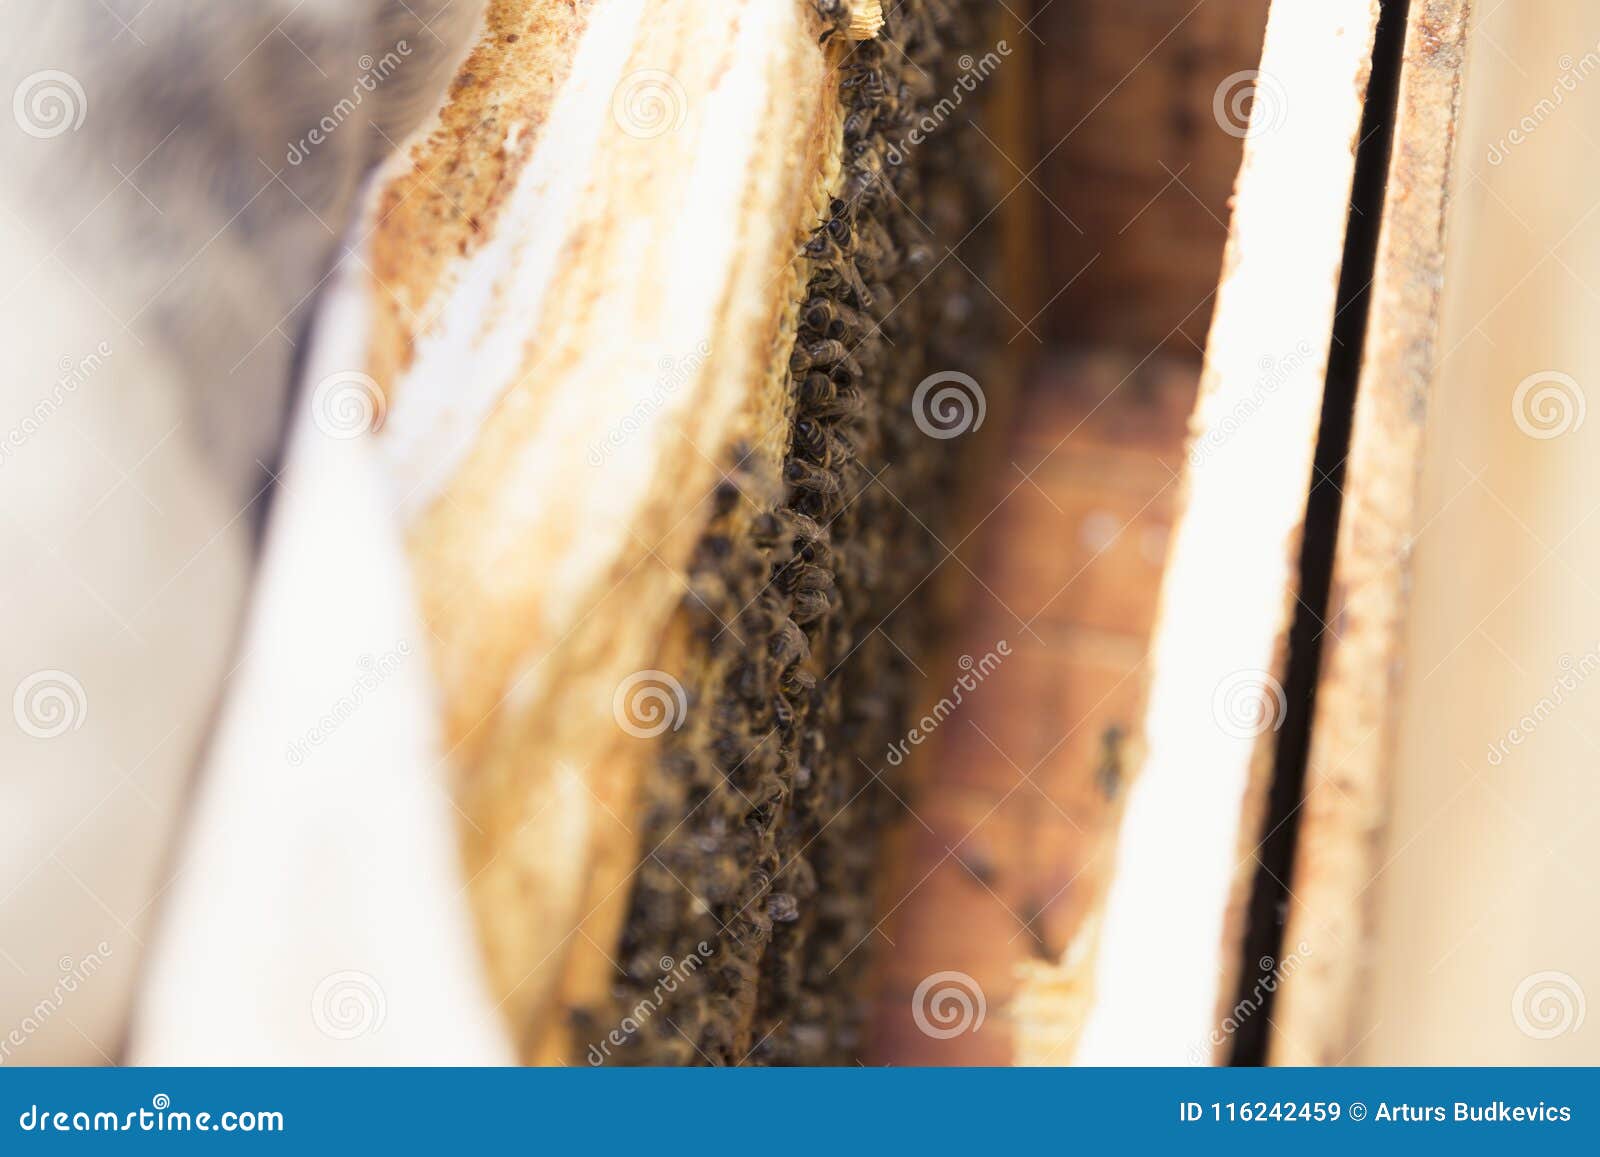 close up view of the opened hive body showing the frames populated by honey bees